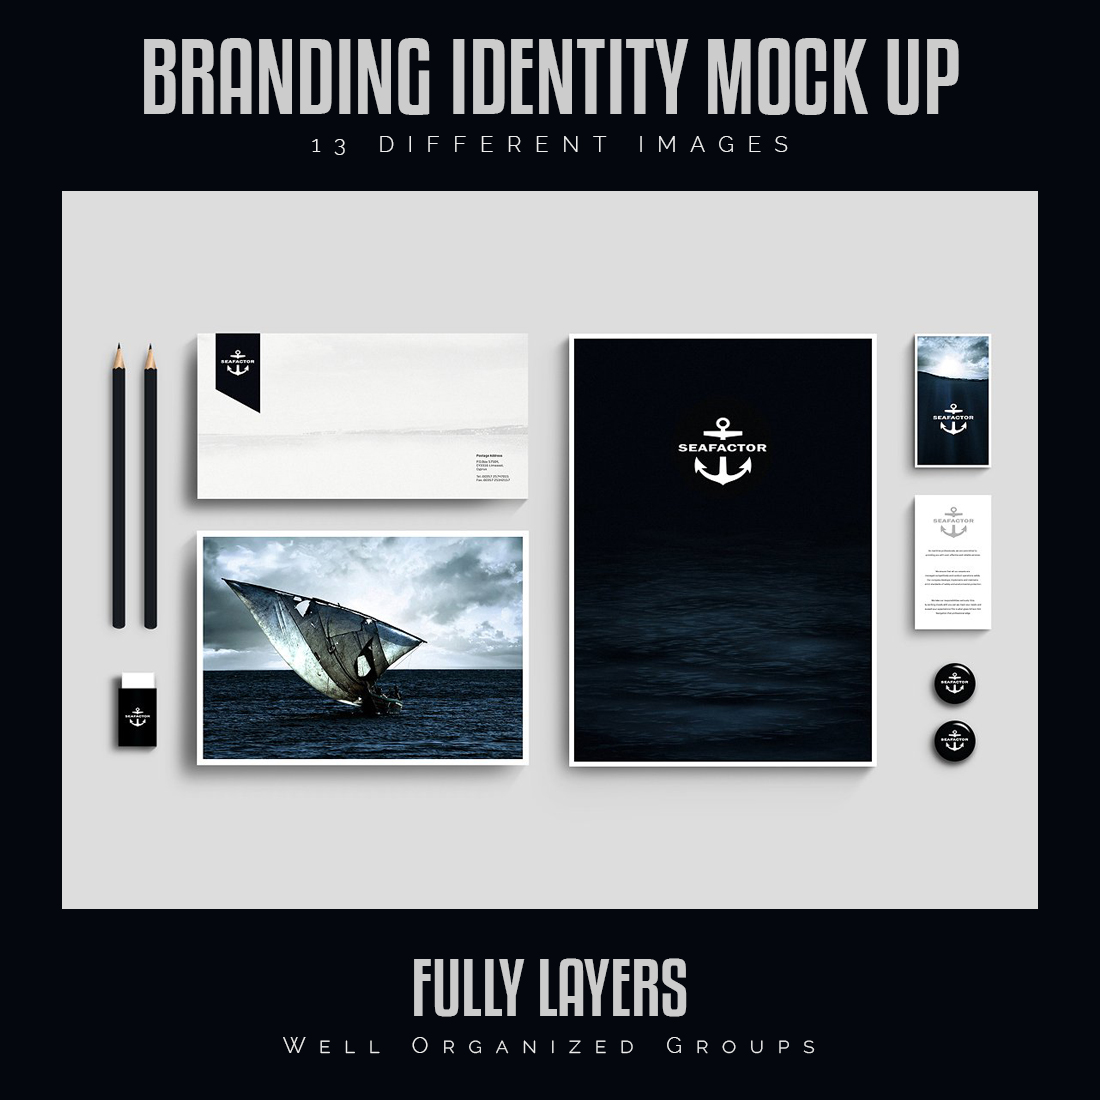 Branding Identity Mock Up preview image.